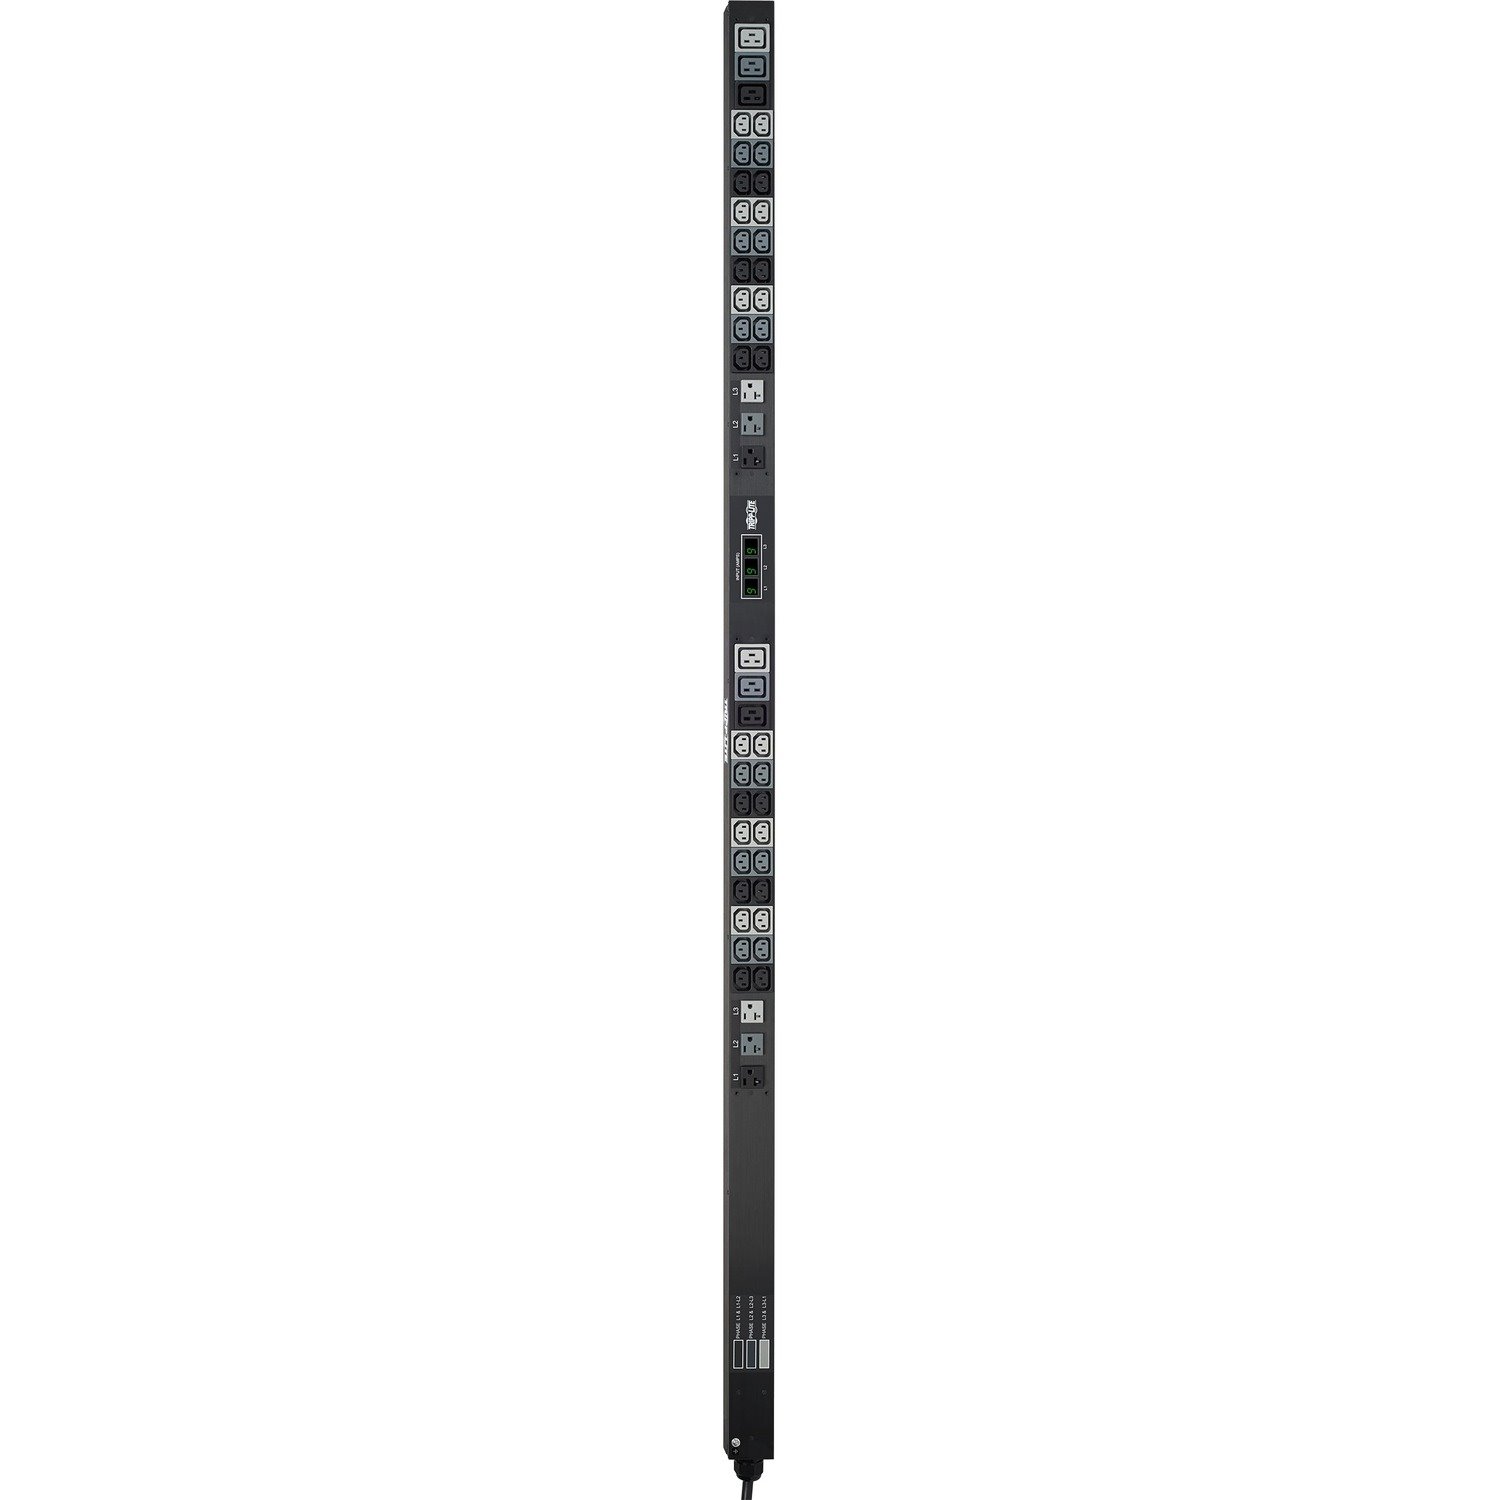 Tripp Lite by Eaton 5.7kW 3-Phase Local Metered PDU, 208/120V Outlets (36 C13, 6 C19, 6 5-15/20R), L21-20P, 6 ft. (1.83 m) Cord, 0U Vertical, TAA